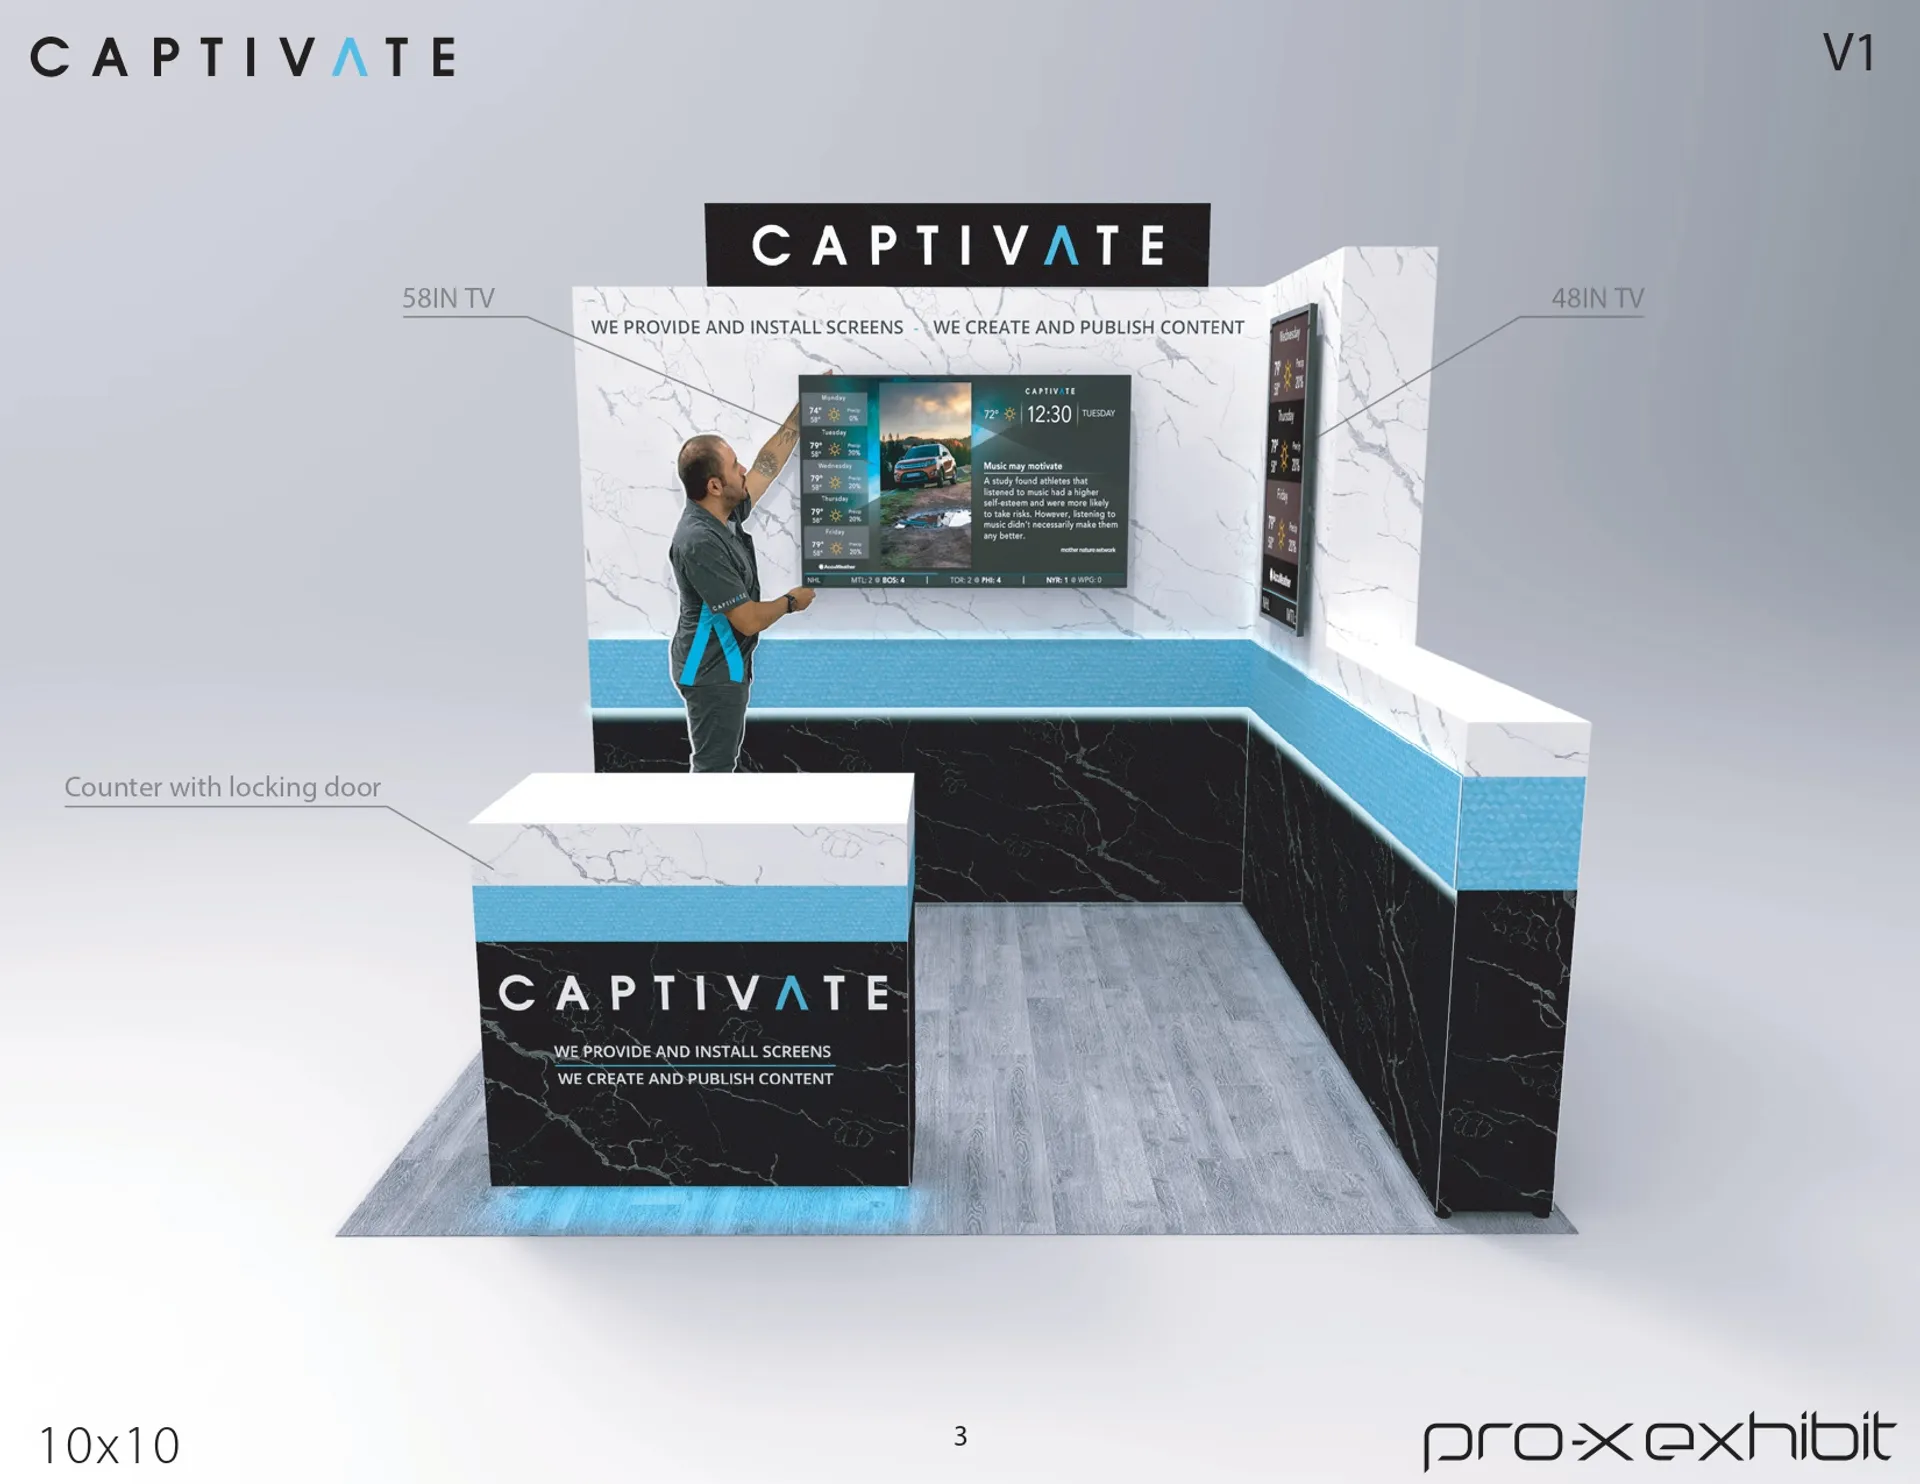 booth-design-projects/Pro-X Exhibits/2024-04-18-10x10-PERIMETER-Project-114/Captivate_10x10_NAA_Pro-X_Exhibit_V1-3_page-0001-6zwe9.jpg